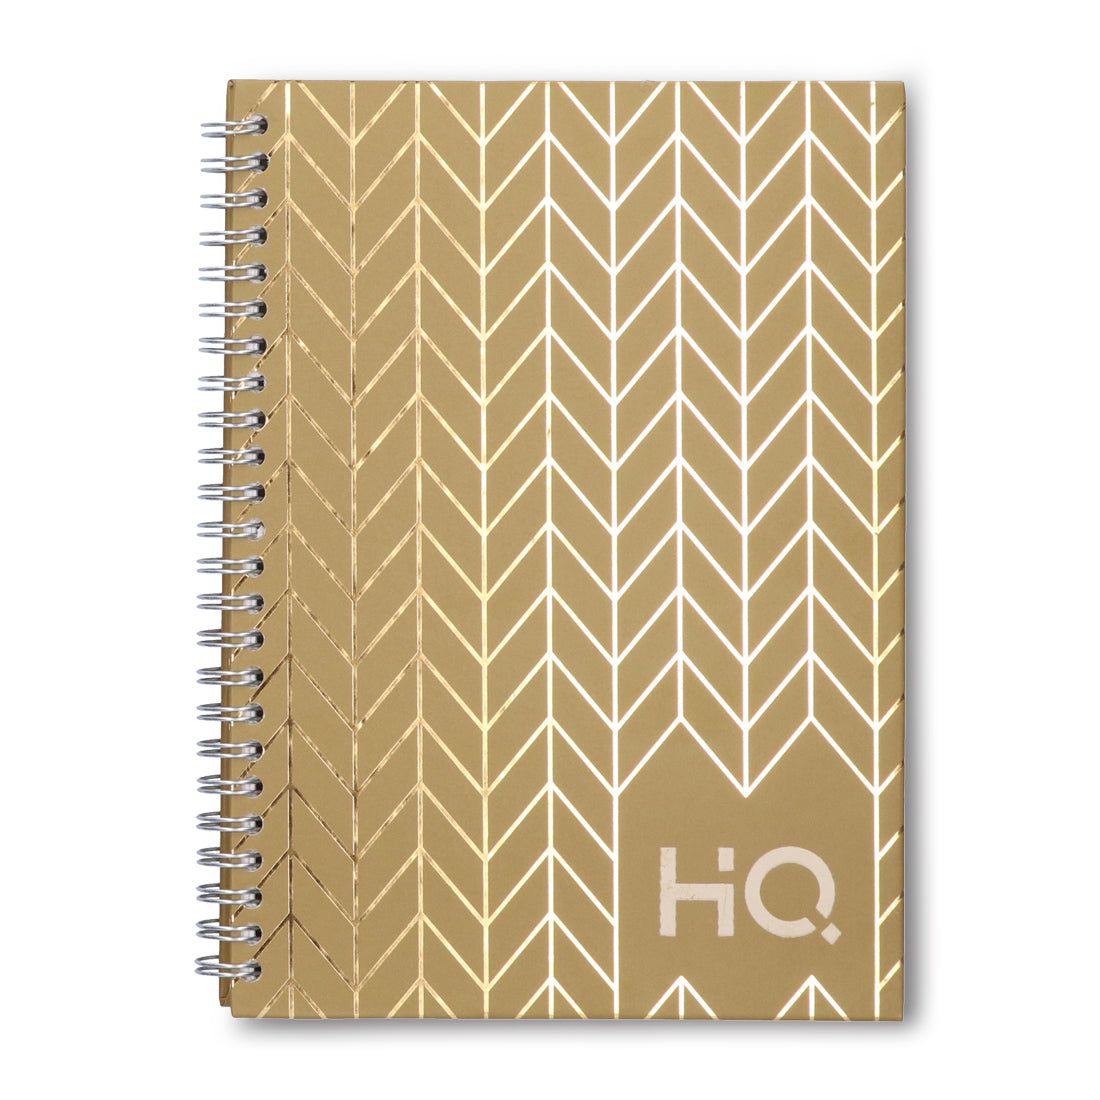 Navneet HQ | Hard Cover Notebook - Corporate Edge (Khaki) for Office and Professional Use | Wiro Bound and Foil Stamping | Single Line | A5 Size - 21 cm x 14.8 cm | 192 Pages